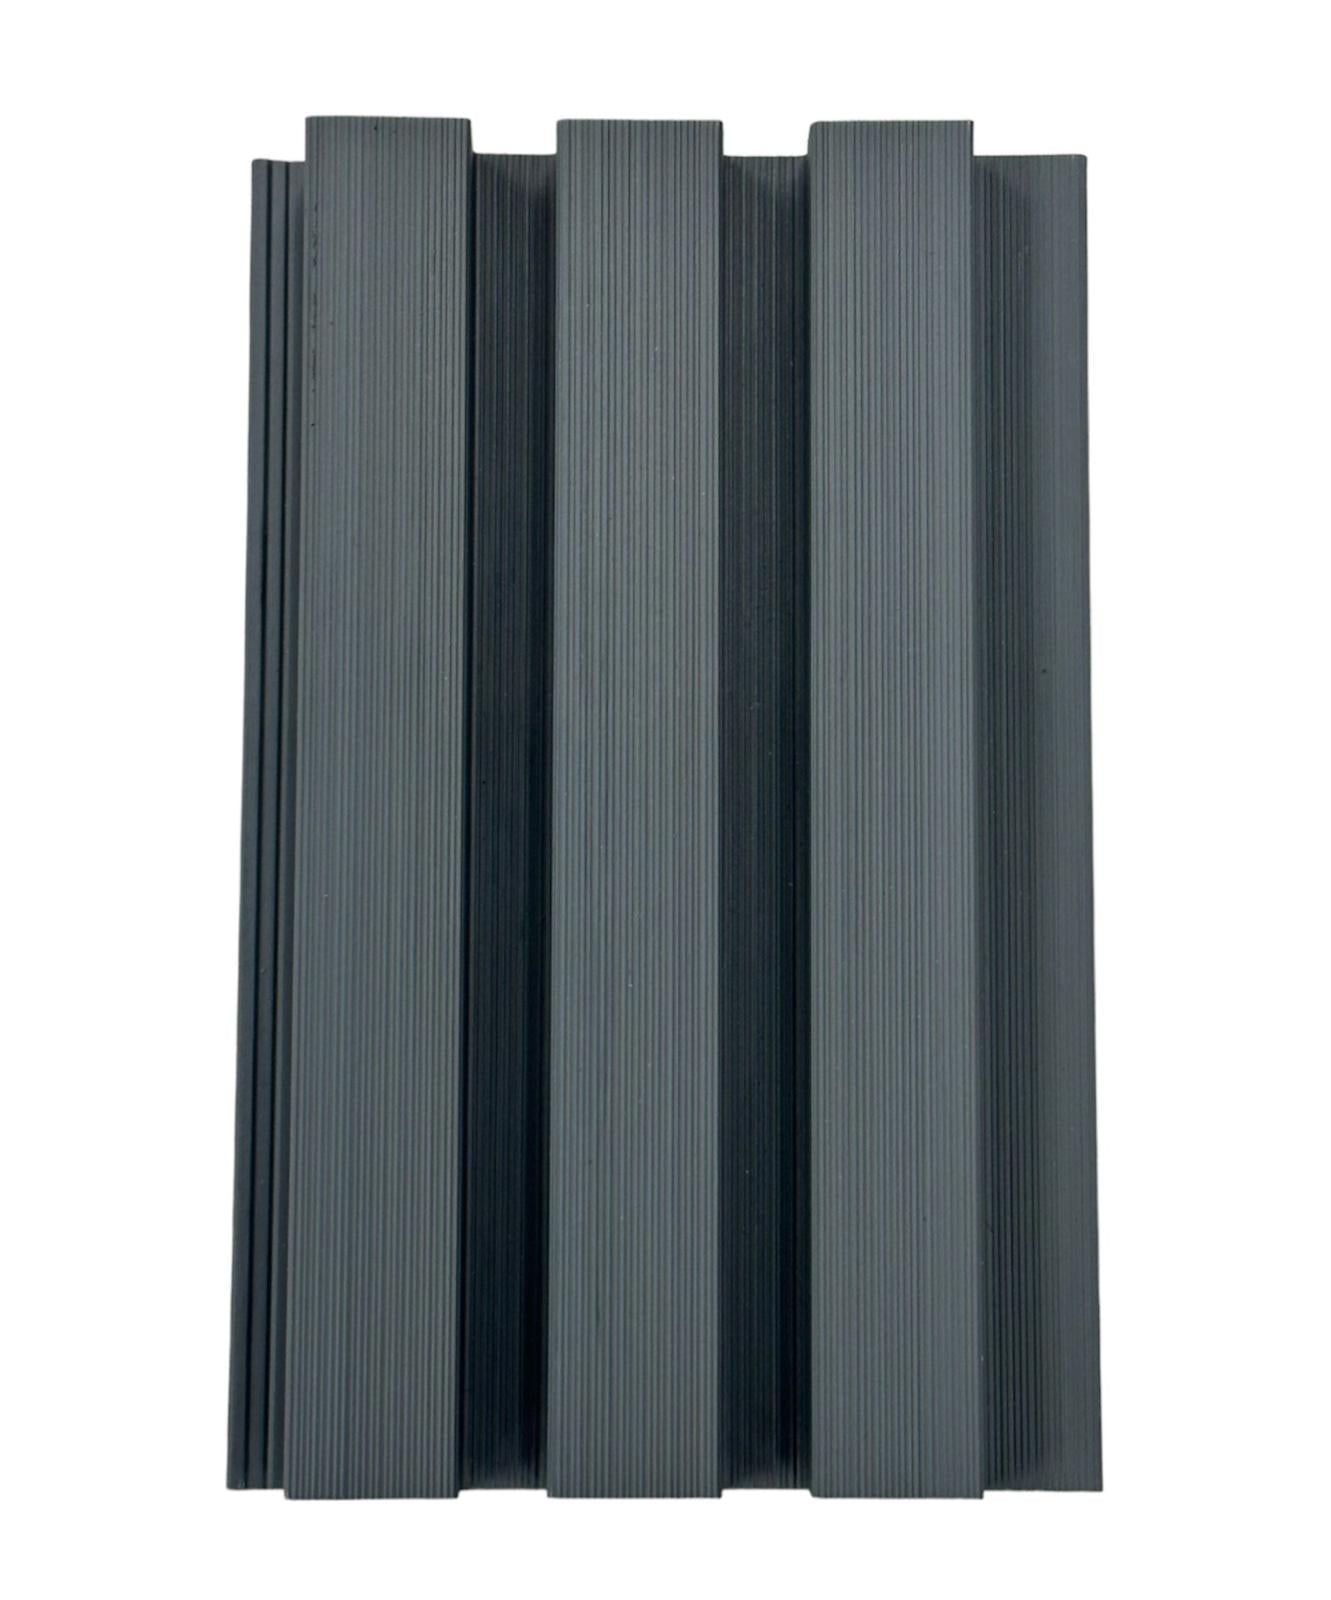 Composite Slatted Cladding – Grey - Series 2